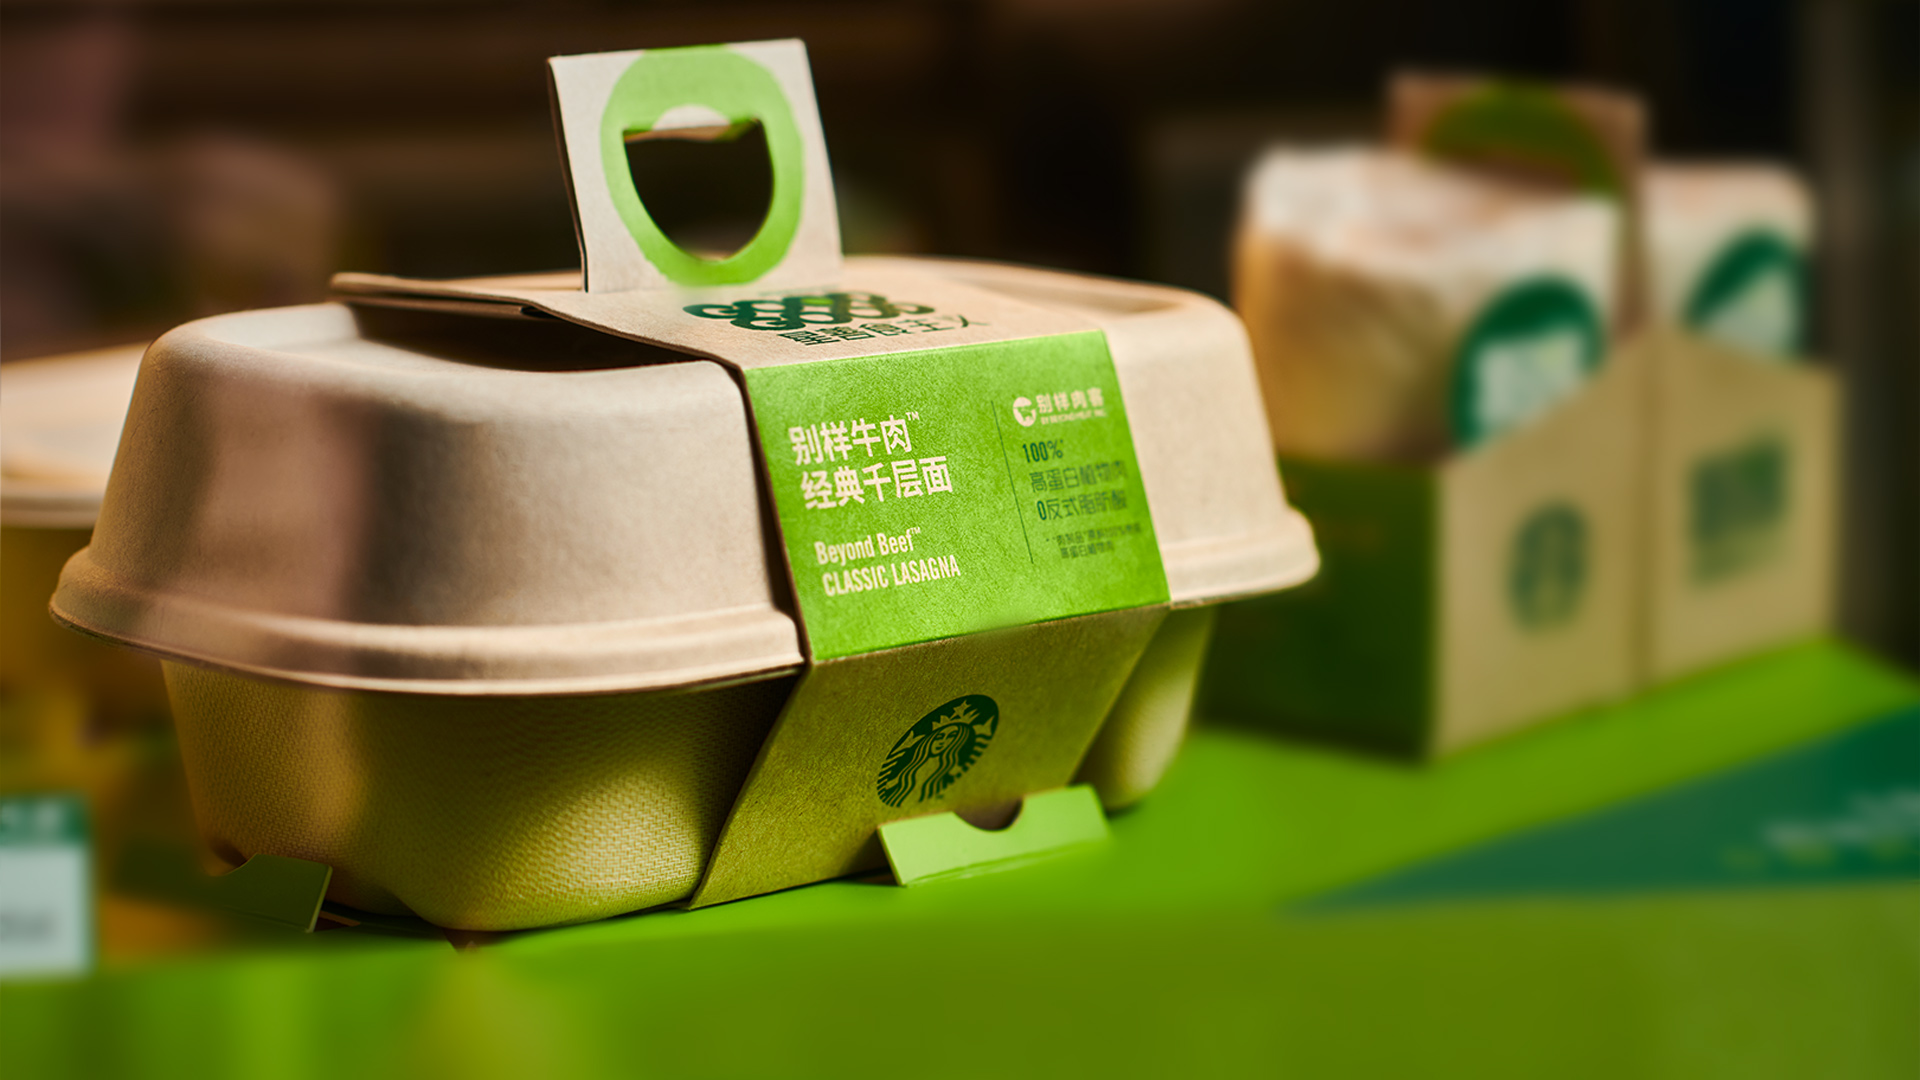 With Starbucks the future is good good, and it's already here